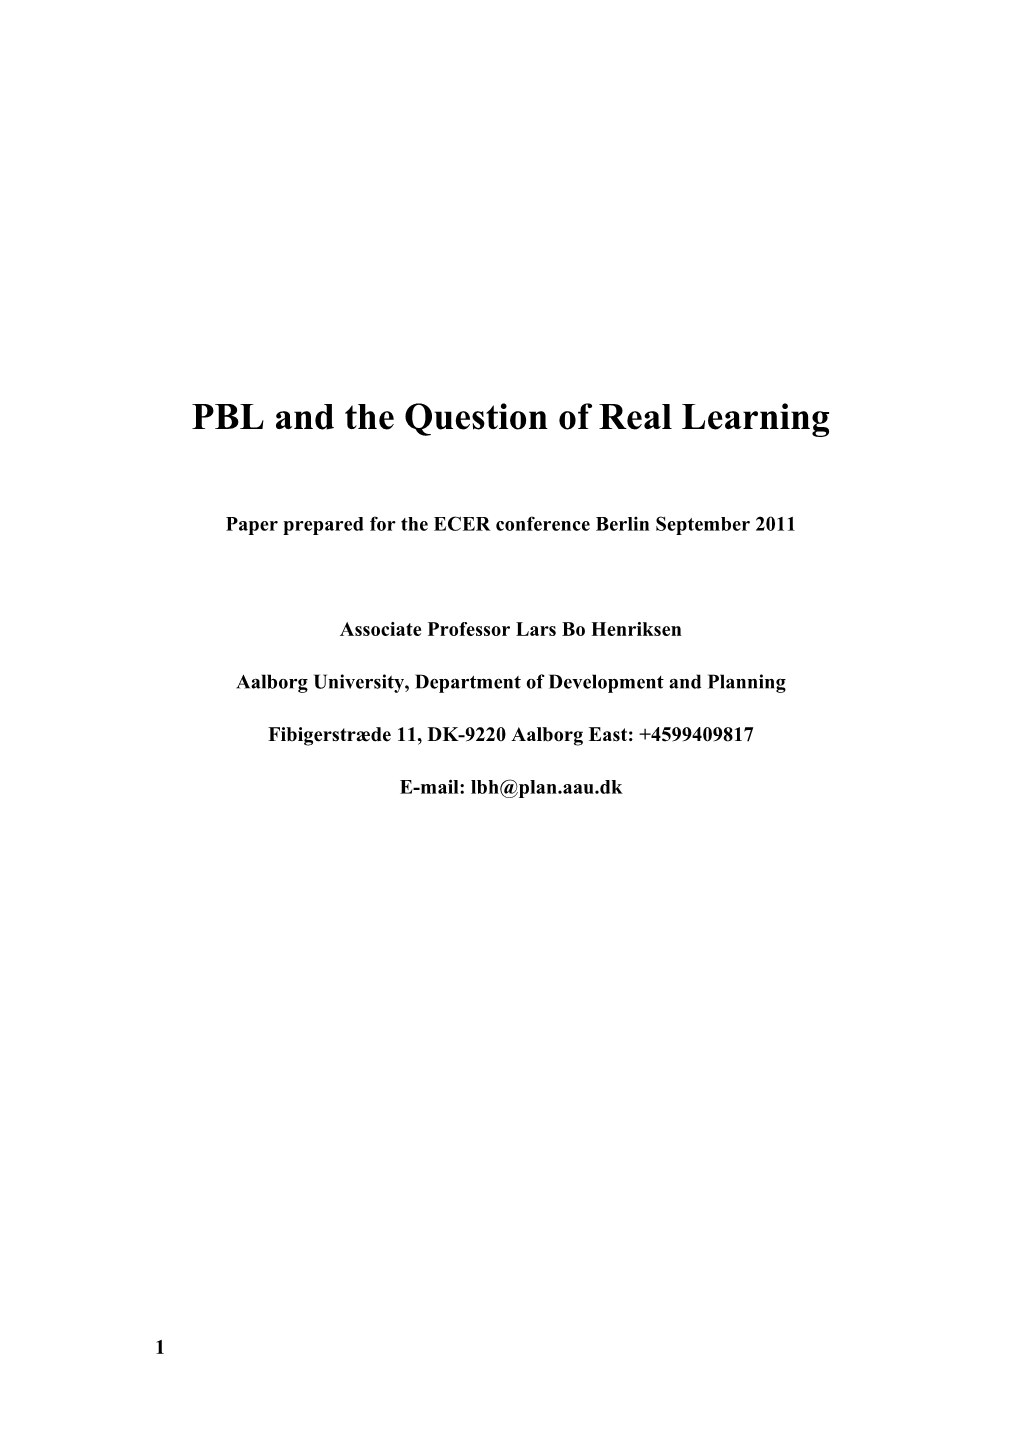 PBL and the Question of Real Learning